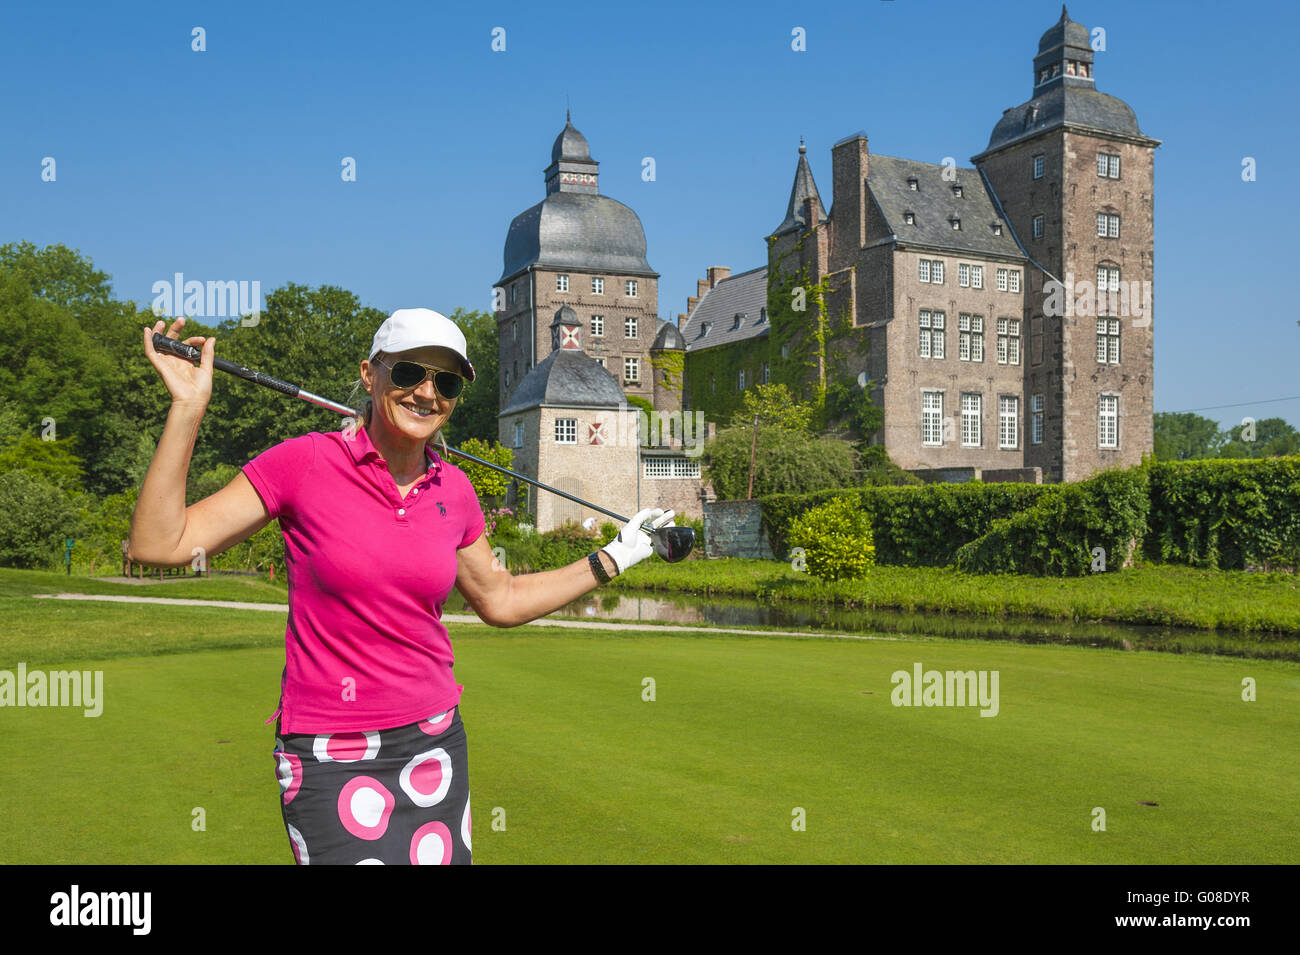 Golfer stands on the golf course in front of castl Stock Photo